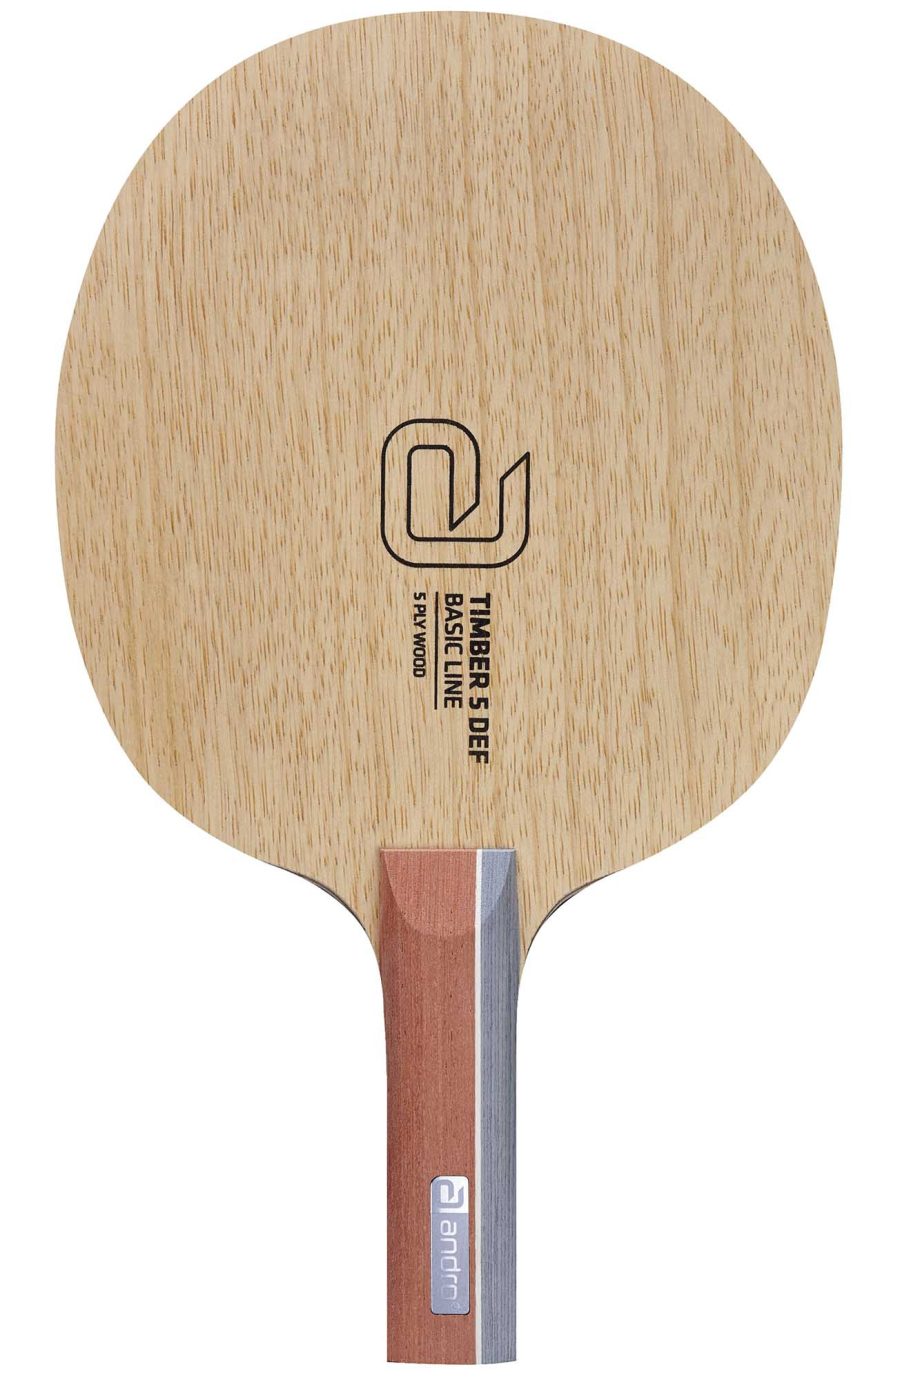 Andro Timber 5 DEF table tennis blade